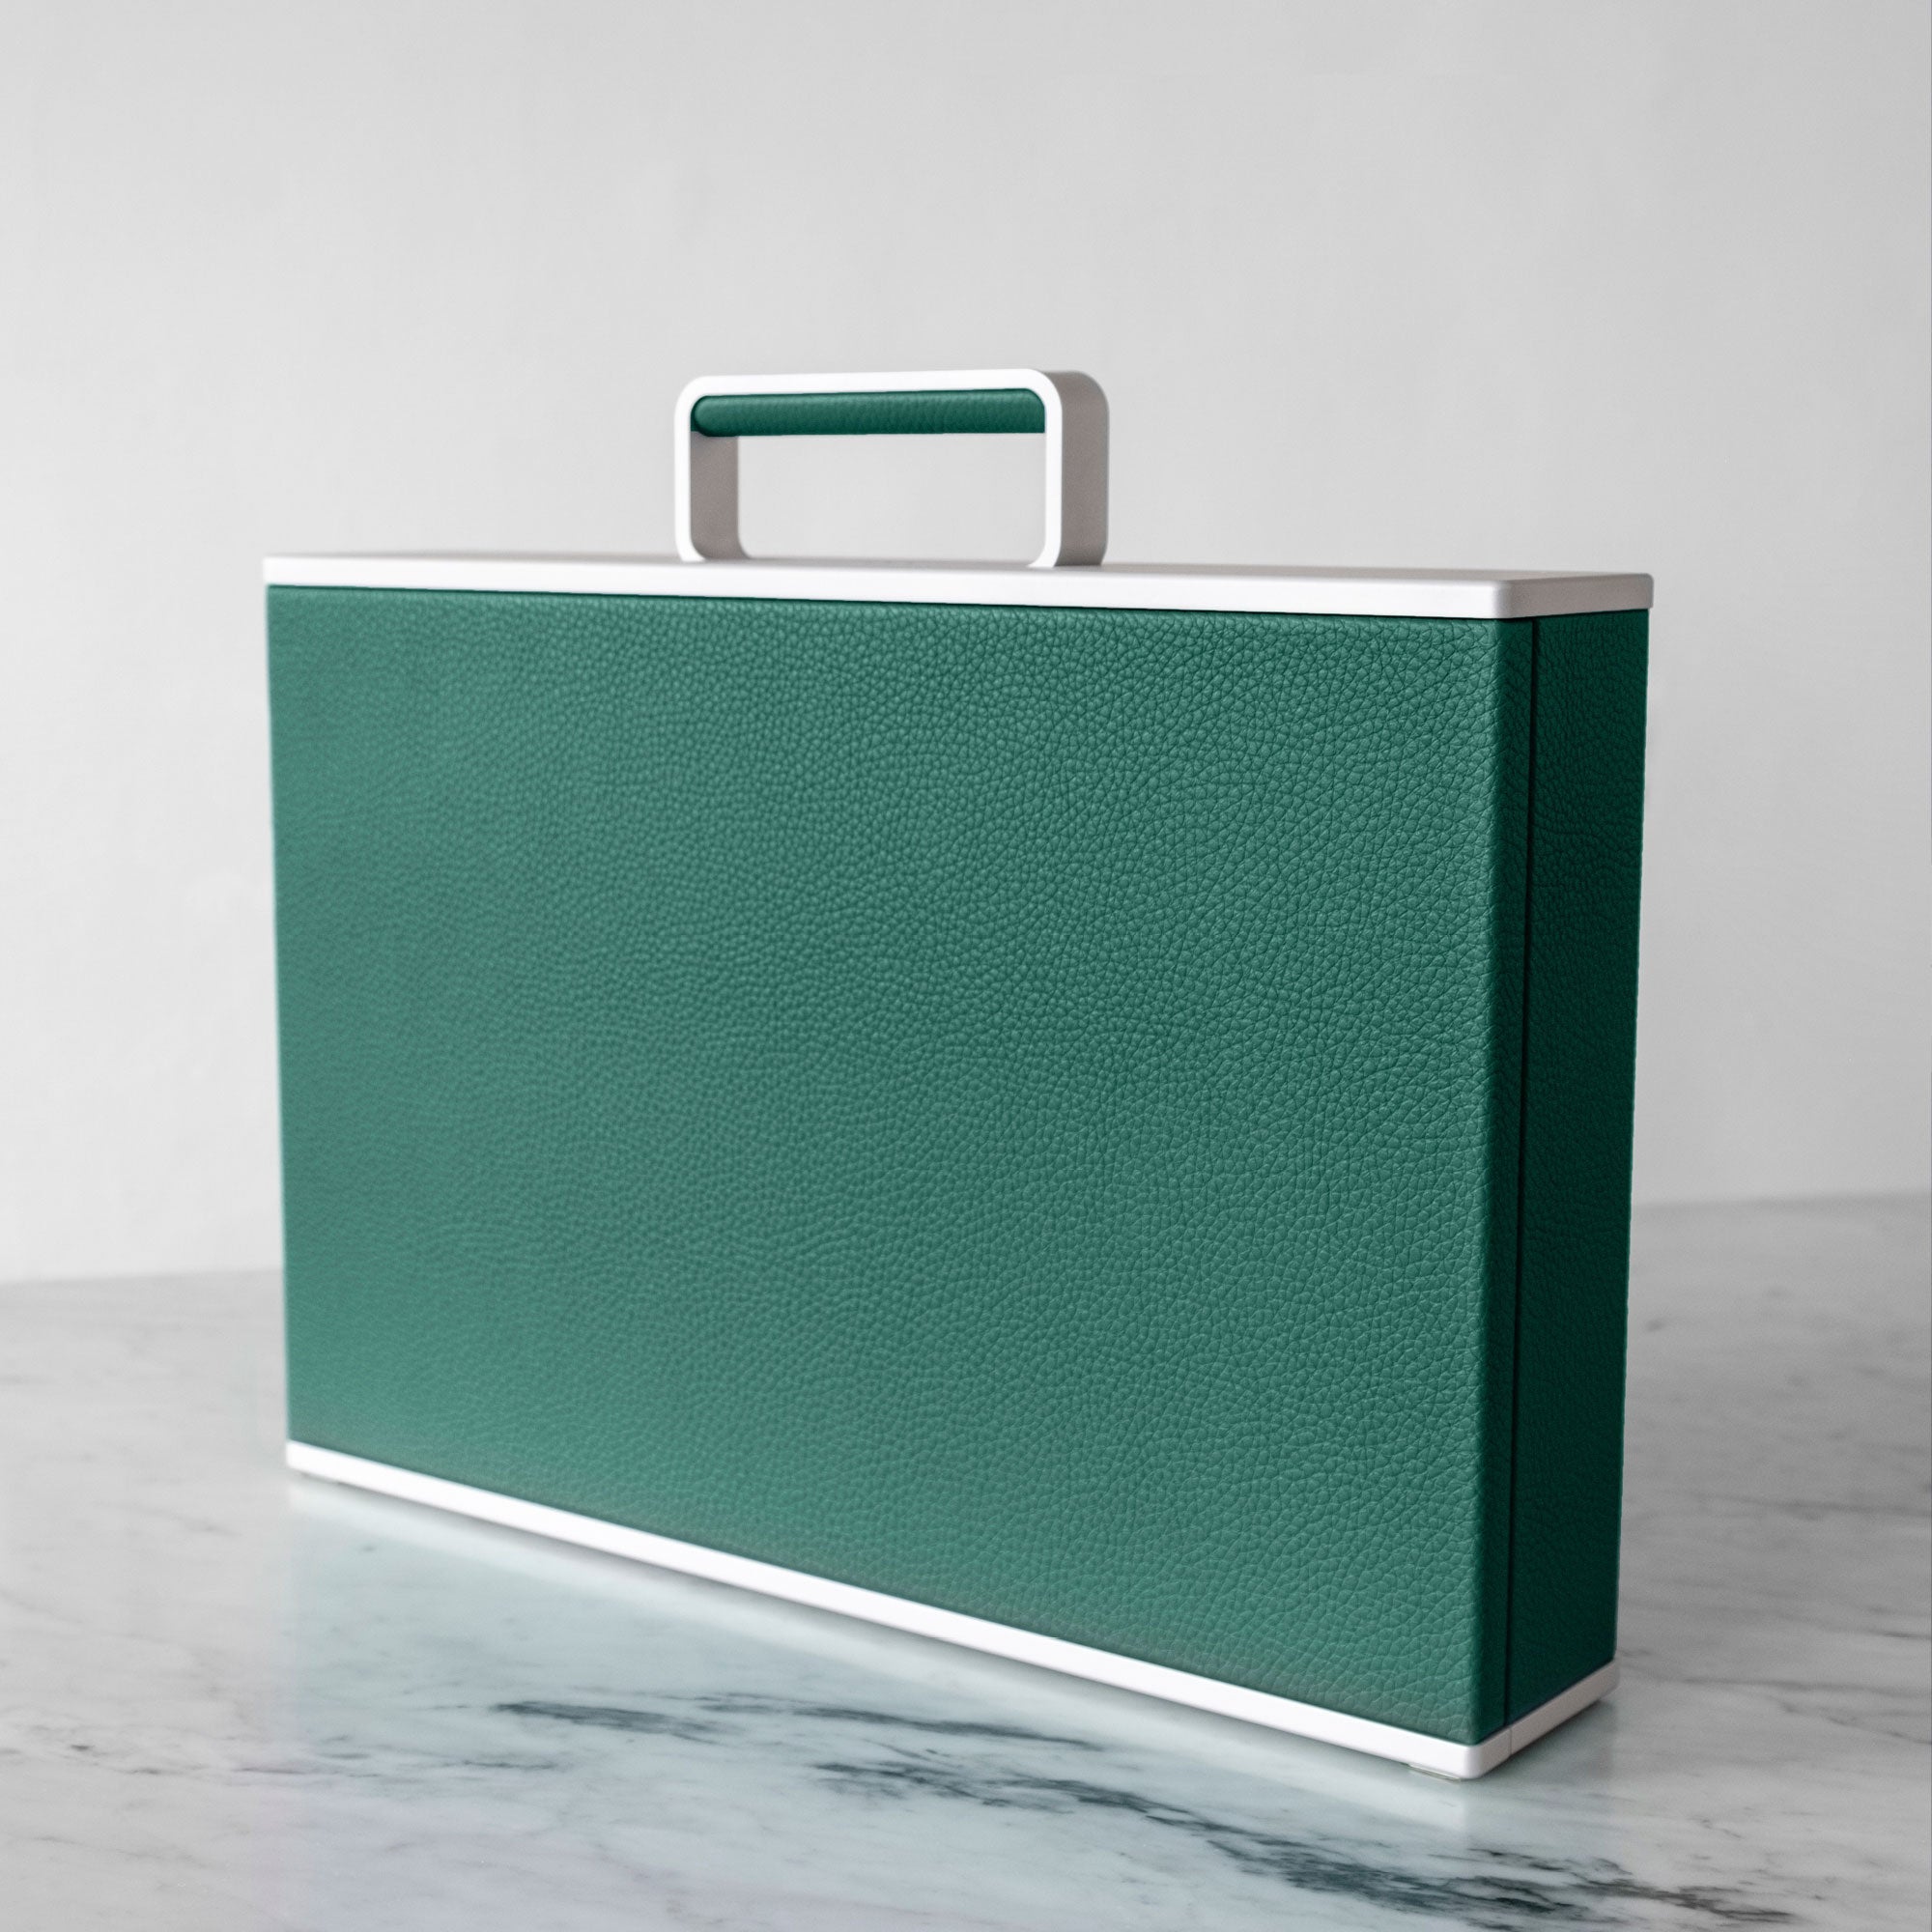 Lifestyle shot of Charles Simon Watch briefcase in emerald leather and grey anodized aluminum made by hand in Canada